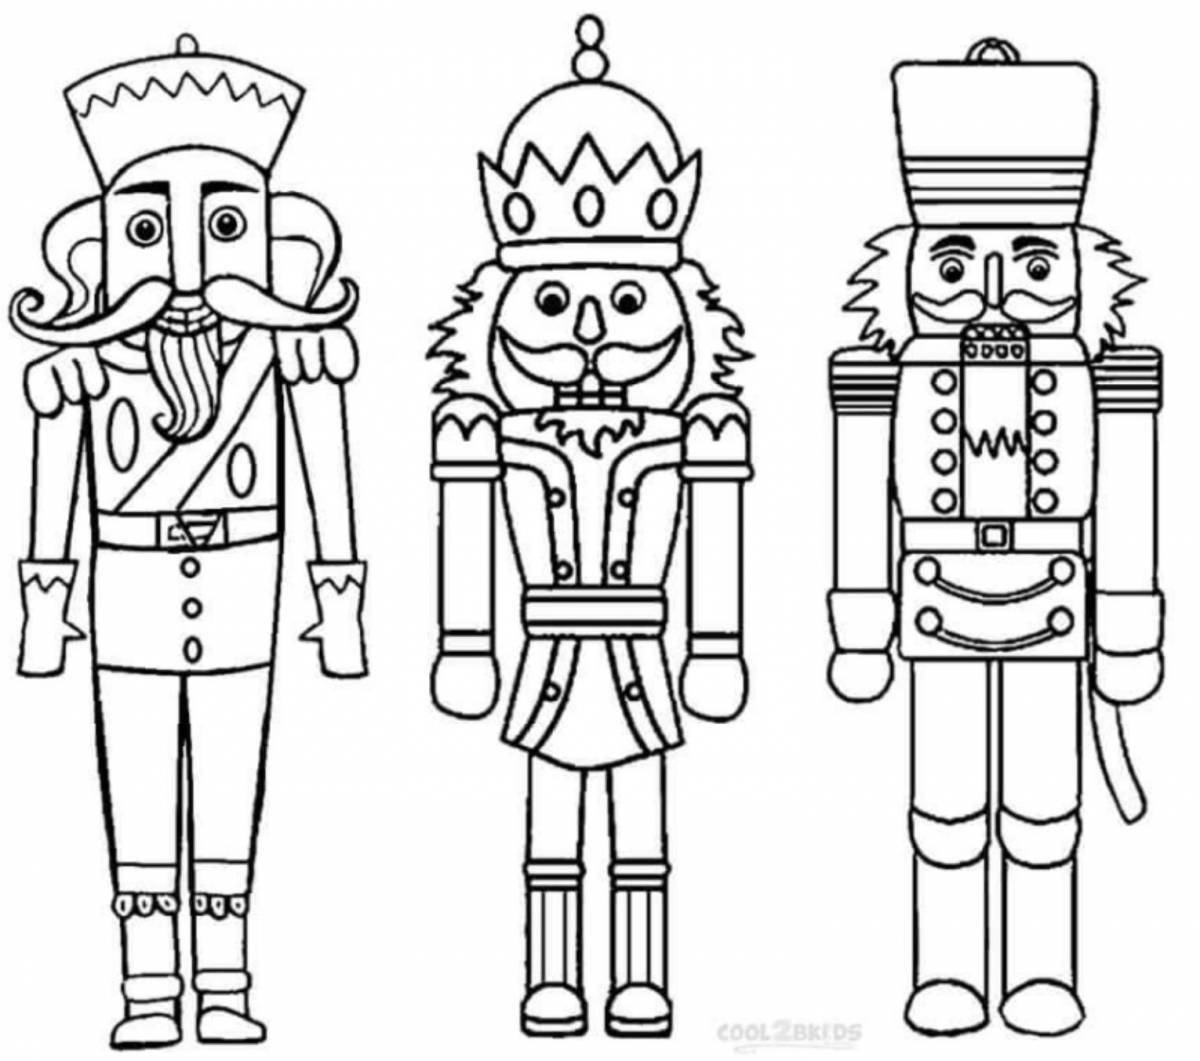 Animated tin soldier coloring page